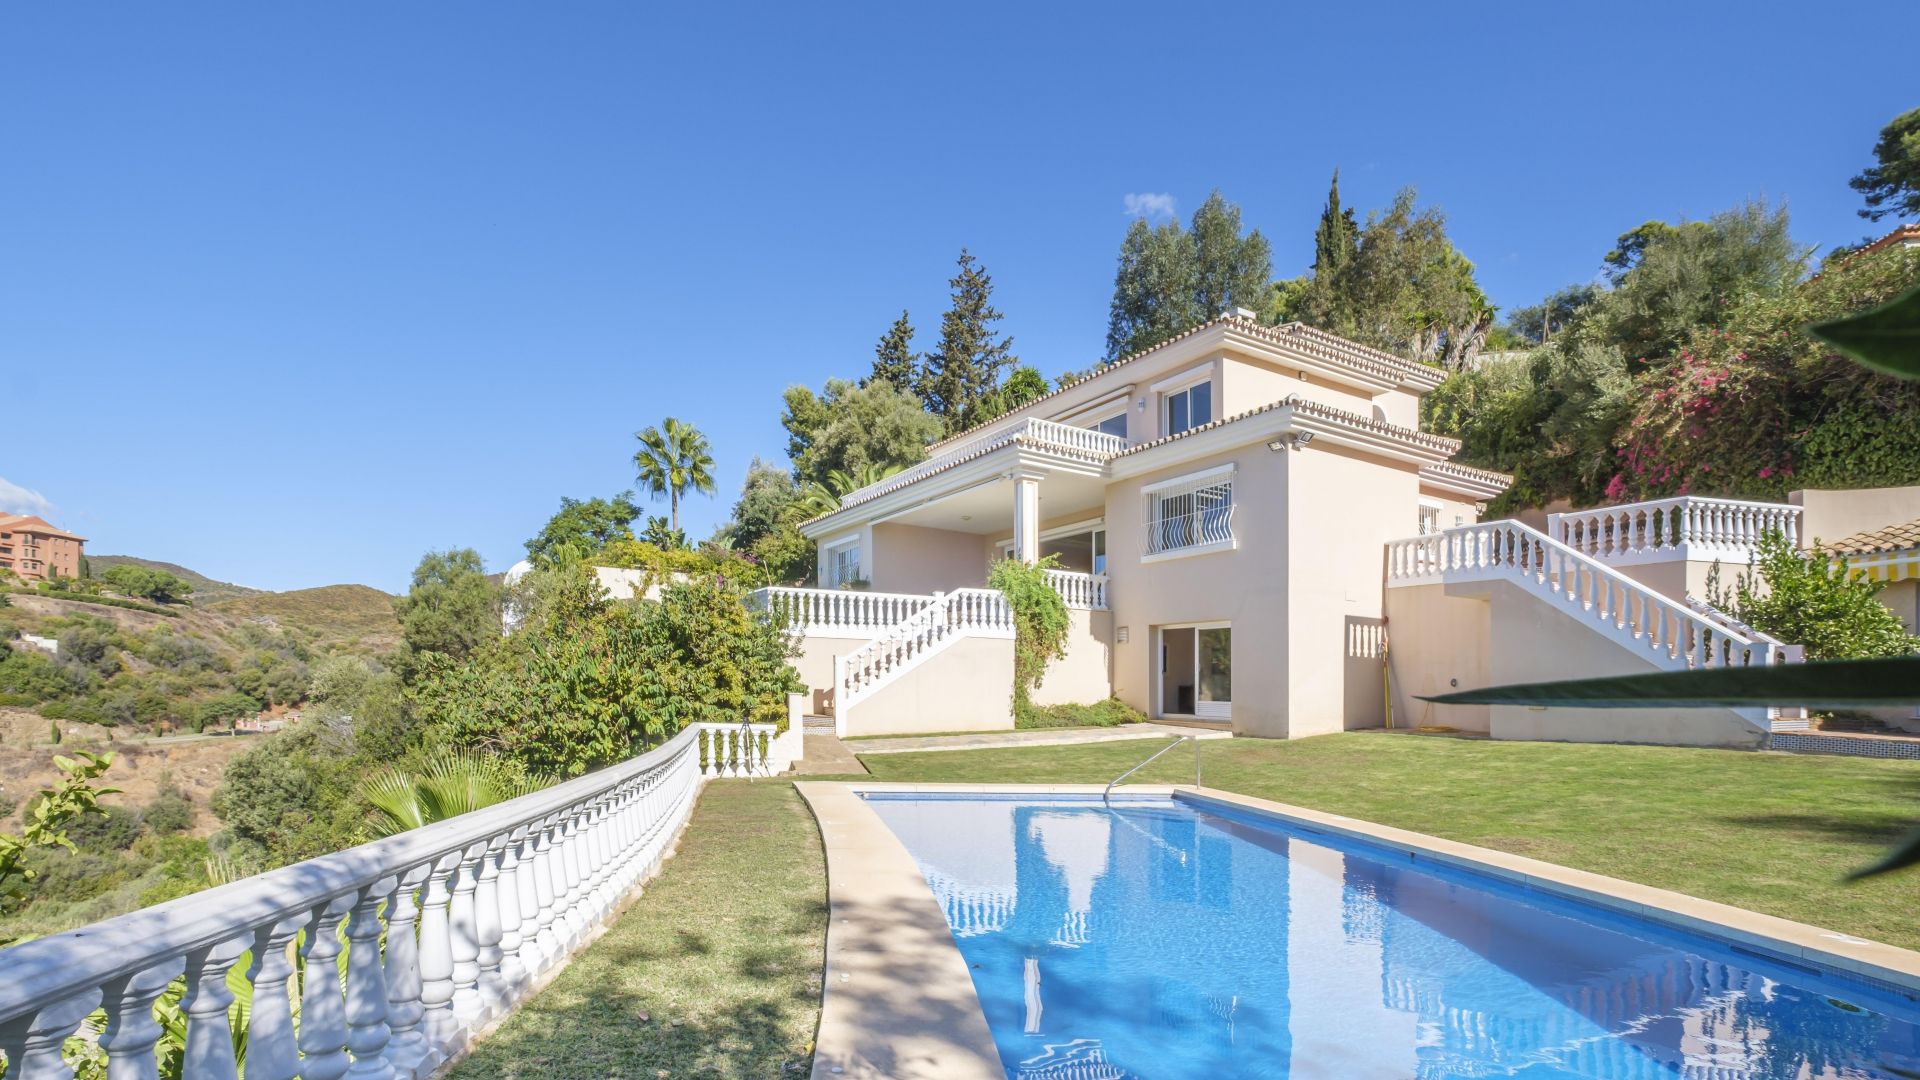 Villa with pool and panoramic views over the coast | Engel & Völkers Marbella